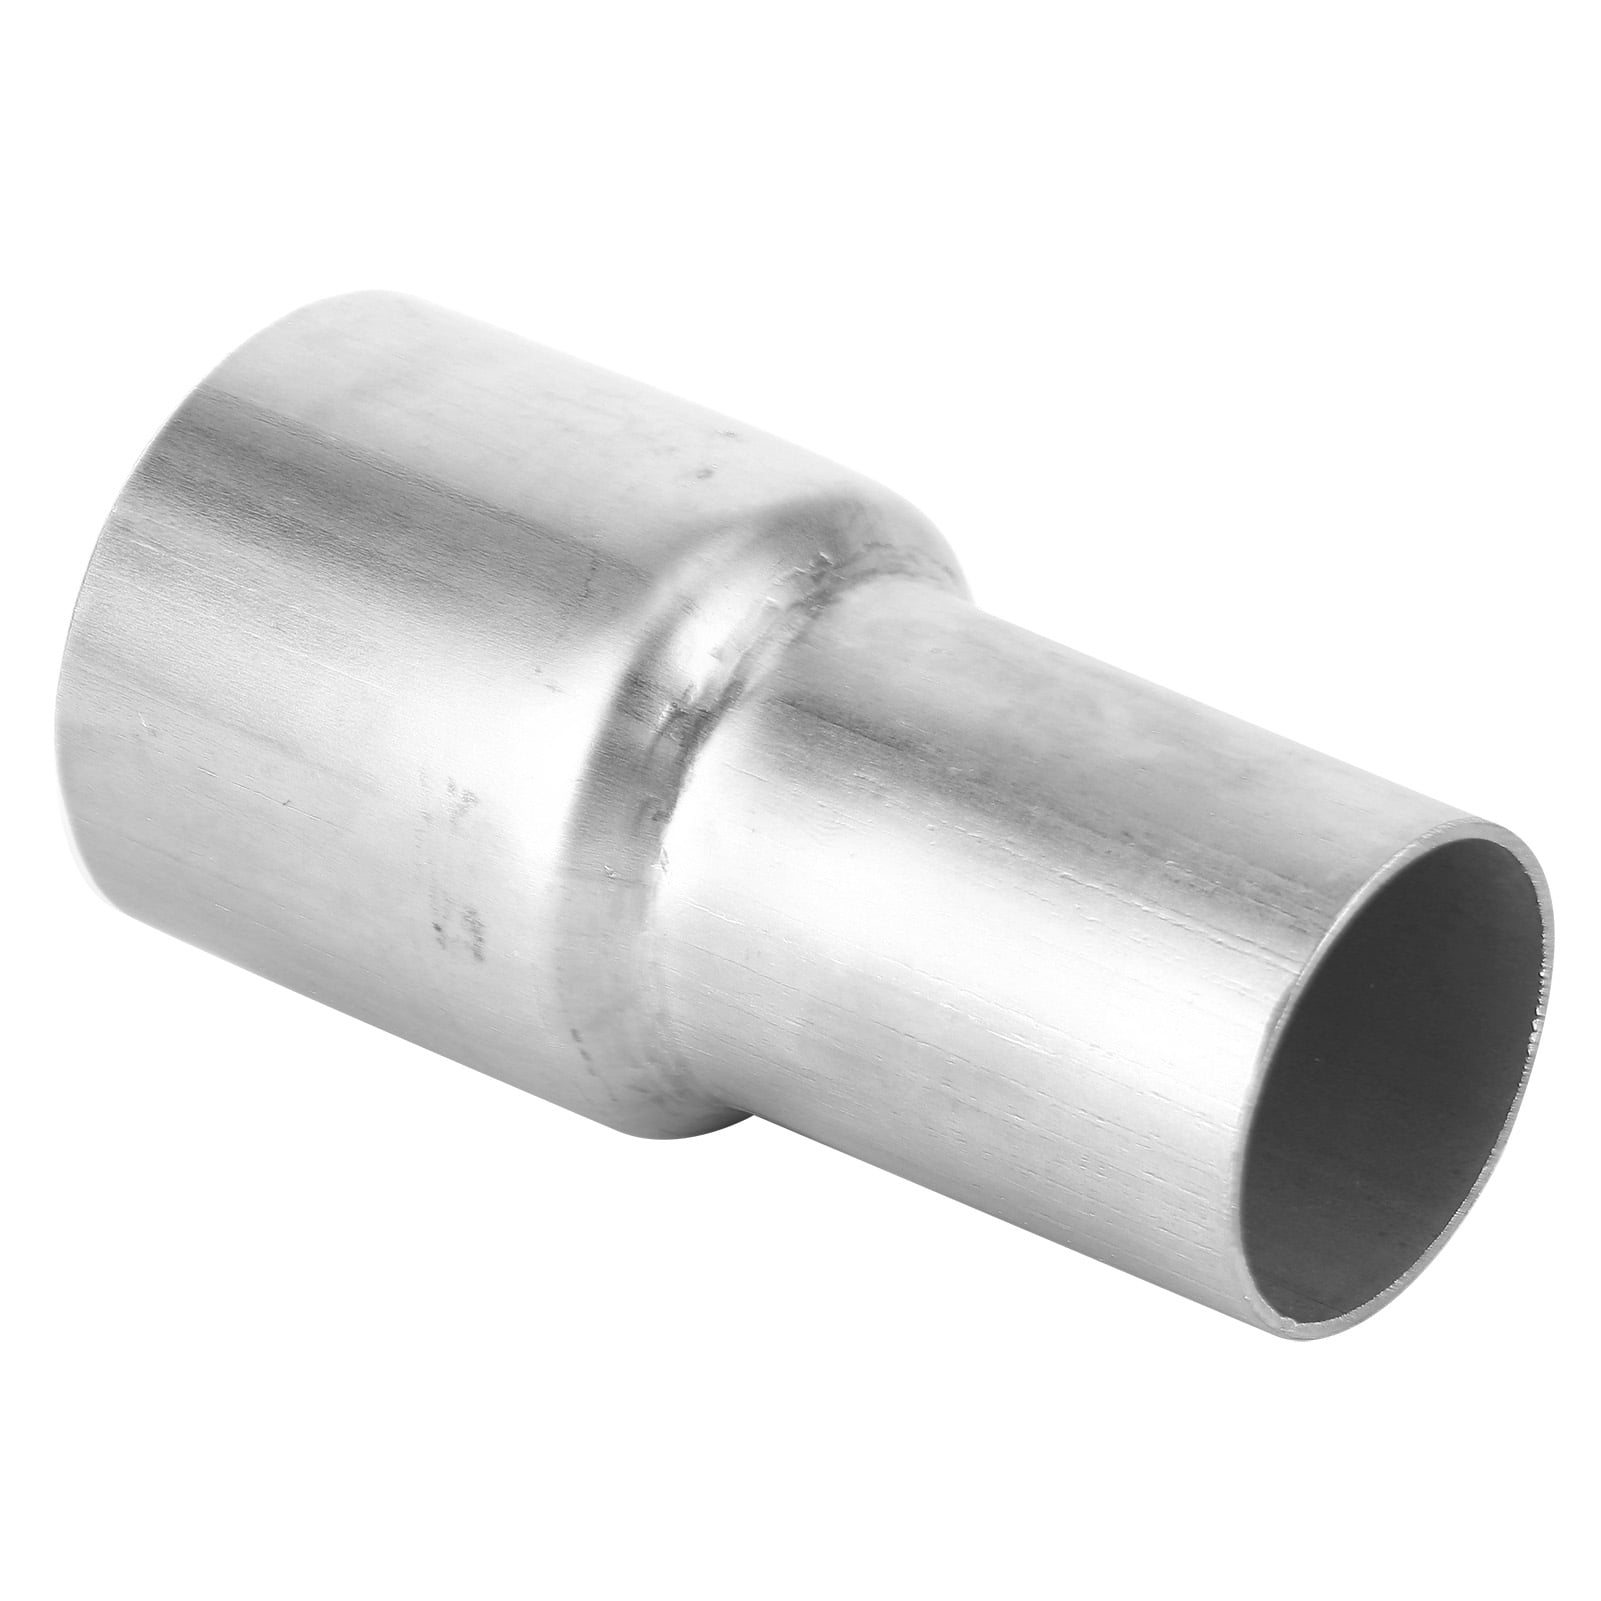 Exhaust Pipe Adapter Universal Exhaust Pipe Adapter Reducer Connector Stainless Steel 2in OD to 1.5in OD 